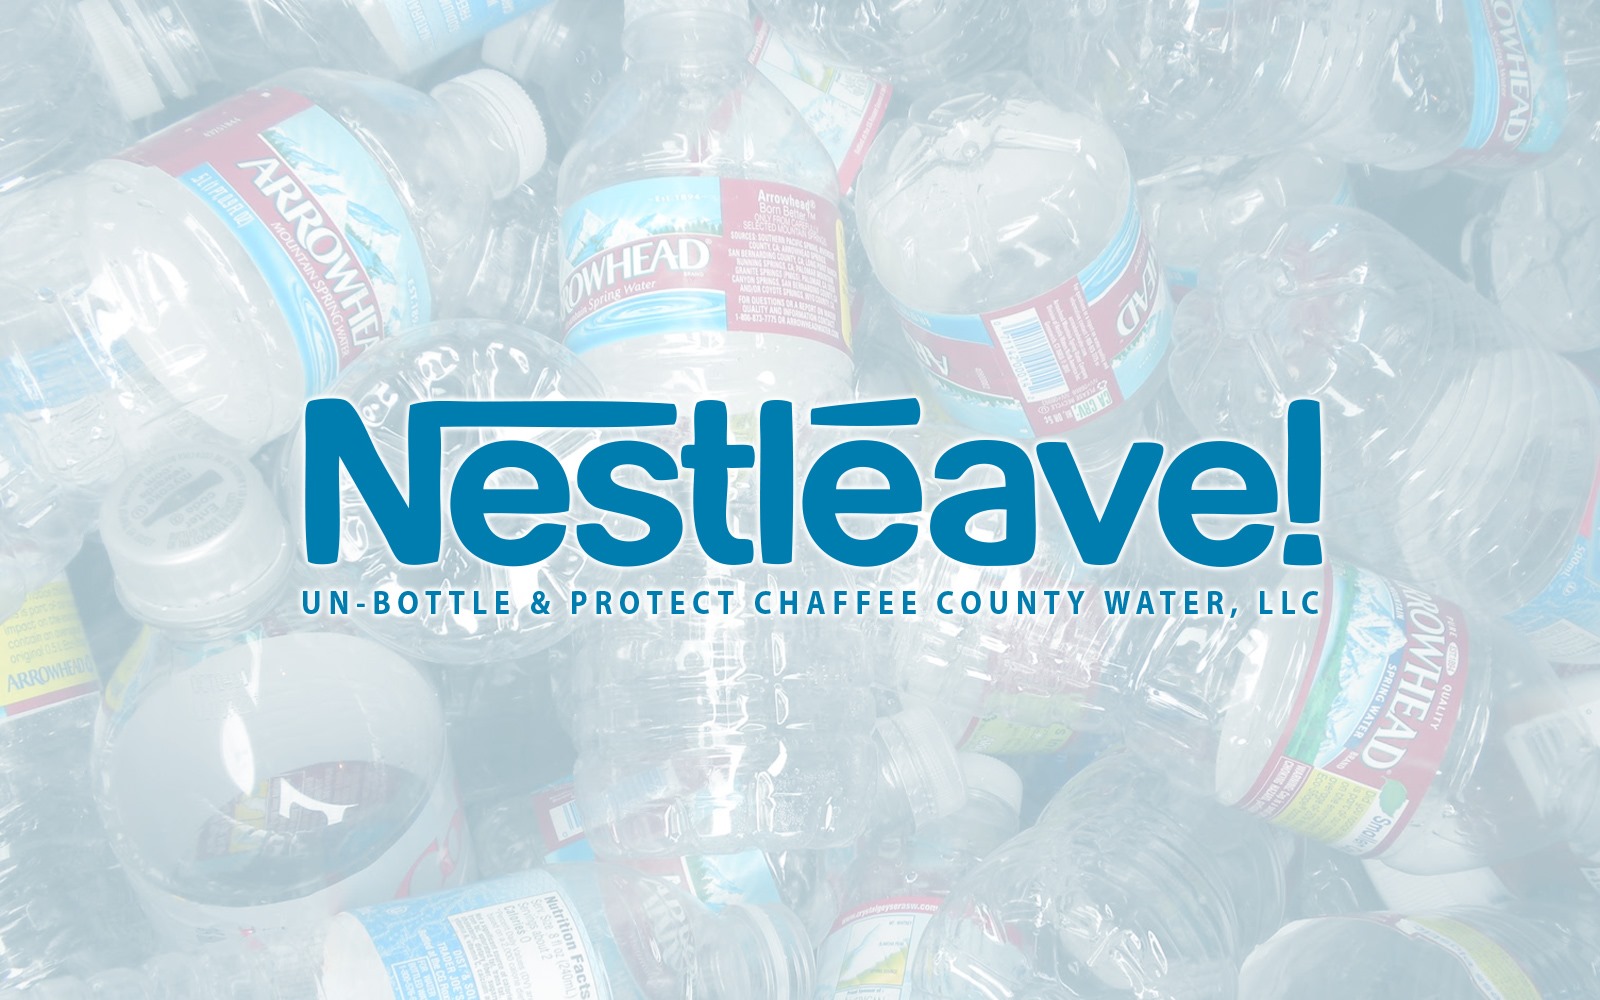 Local residents oppose Nestlé permit extension